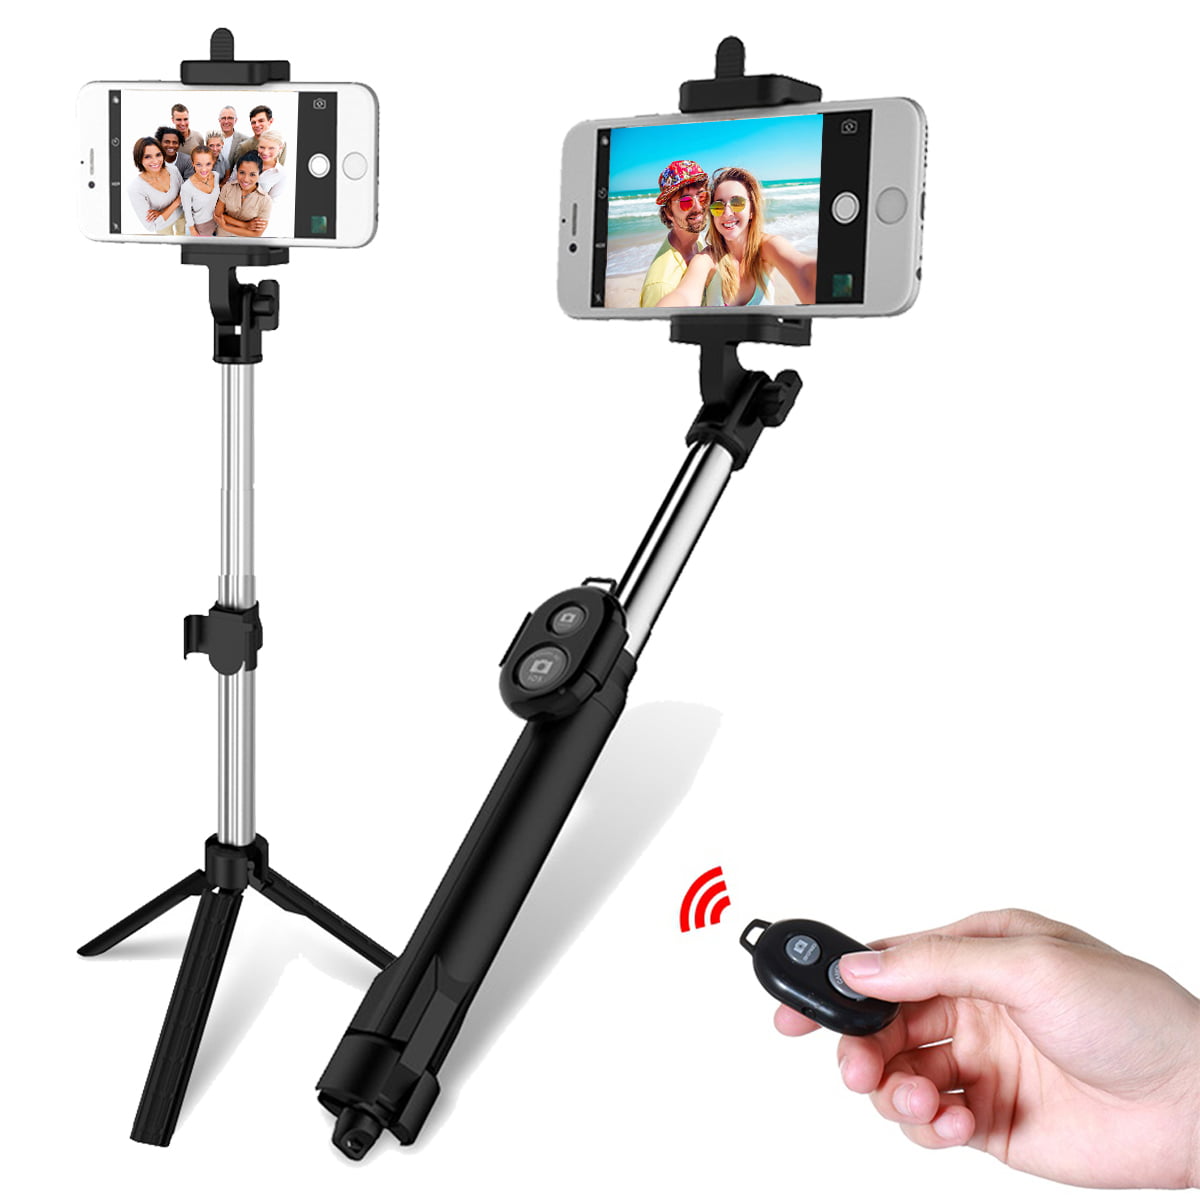 Hot Pink, 1PC Selfie Stick Cell Phone Tripod Portable Extendable Monopod Self-Pole Handheld Wired Selfie Stick for iPhone